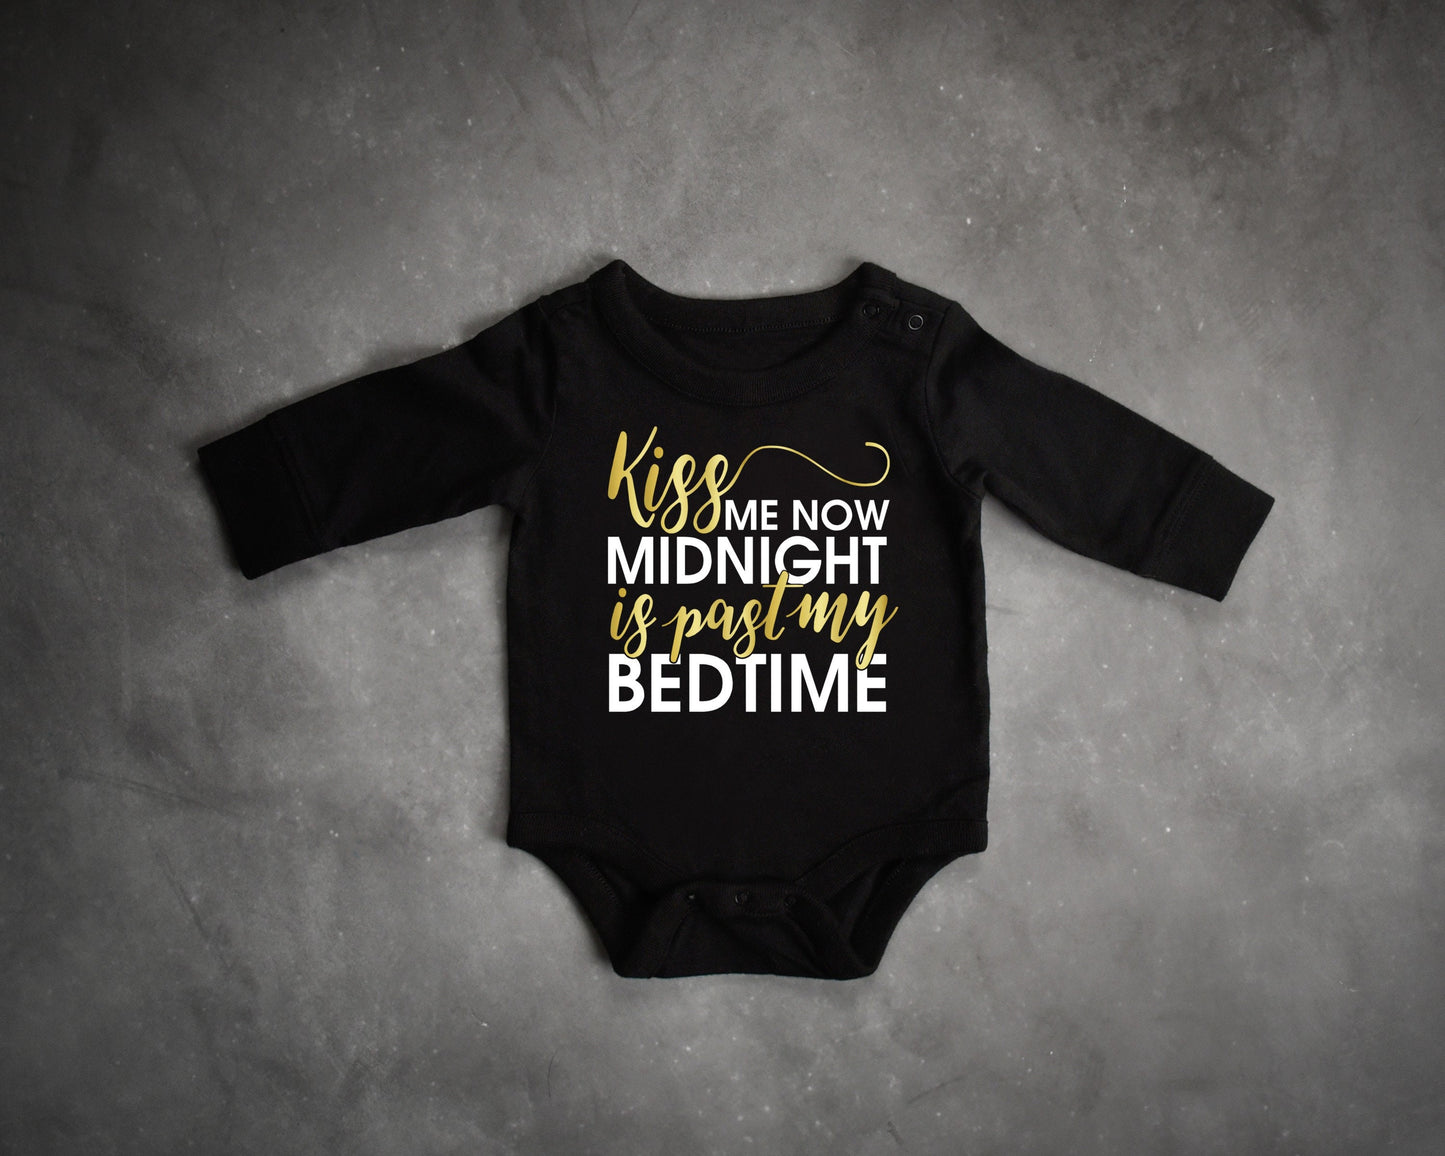 Kiss Me Now, Midnight Is Past My Bedtime New Years Eve Infant or Toddler Shirt or Bodysuit - toddler new years - my first new years eve